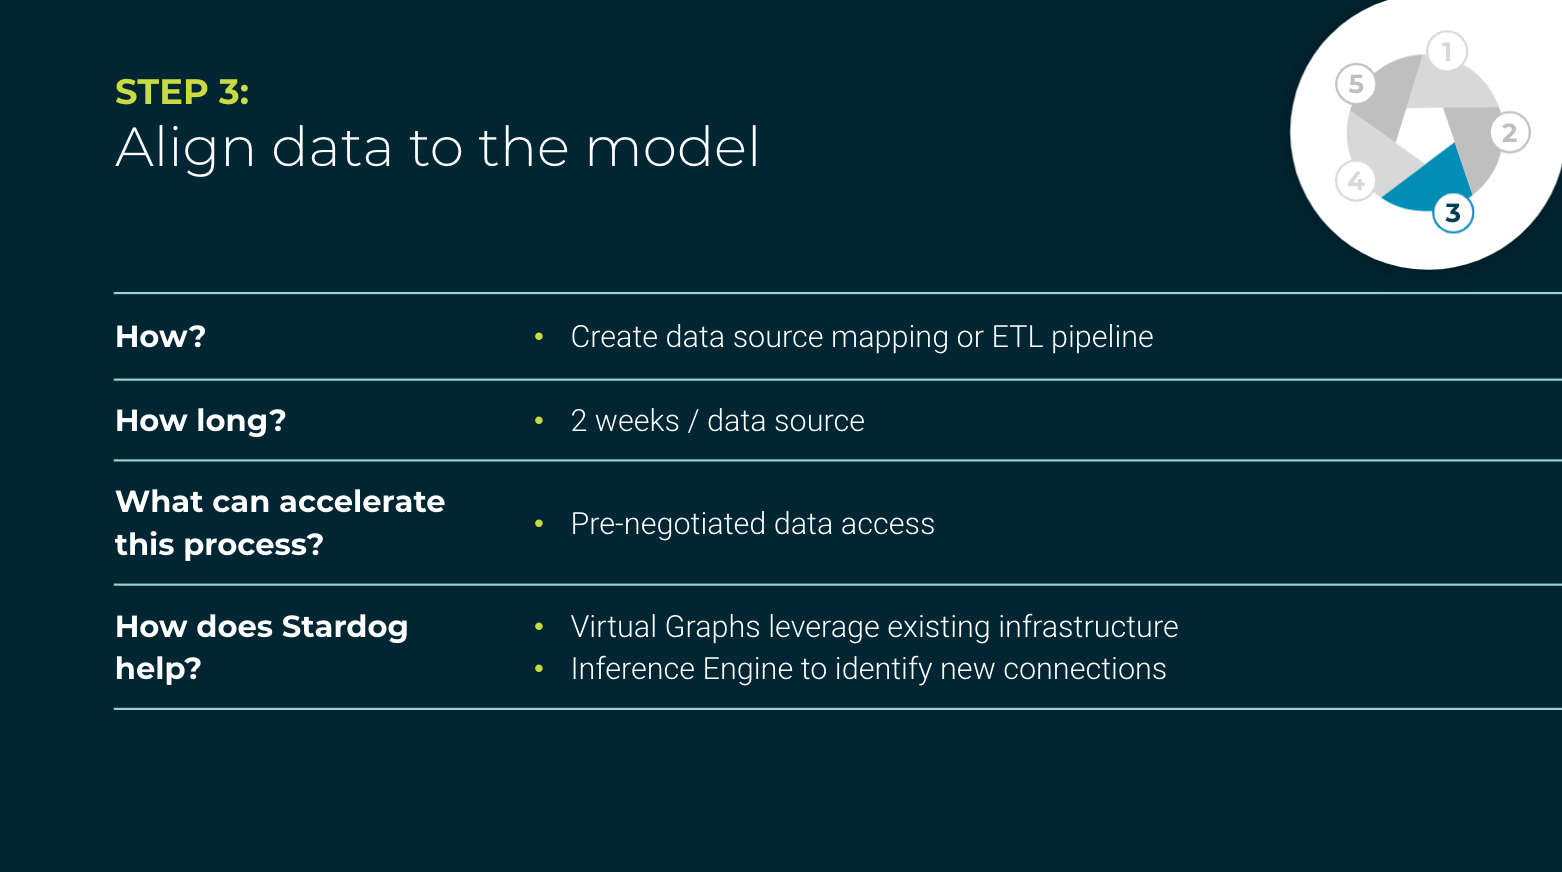 Step 3: Align data to the model